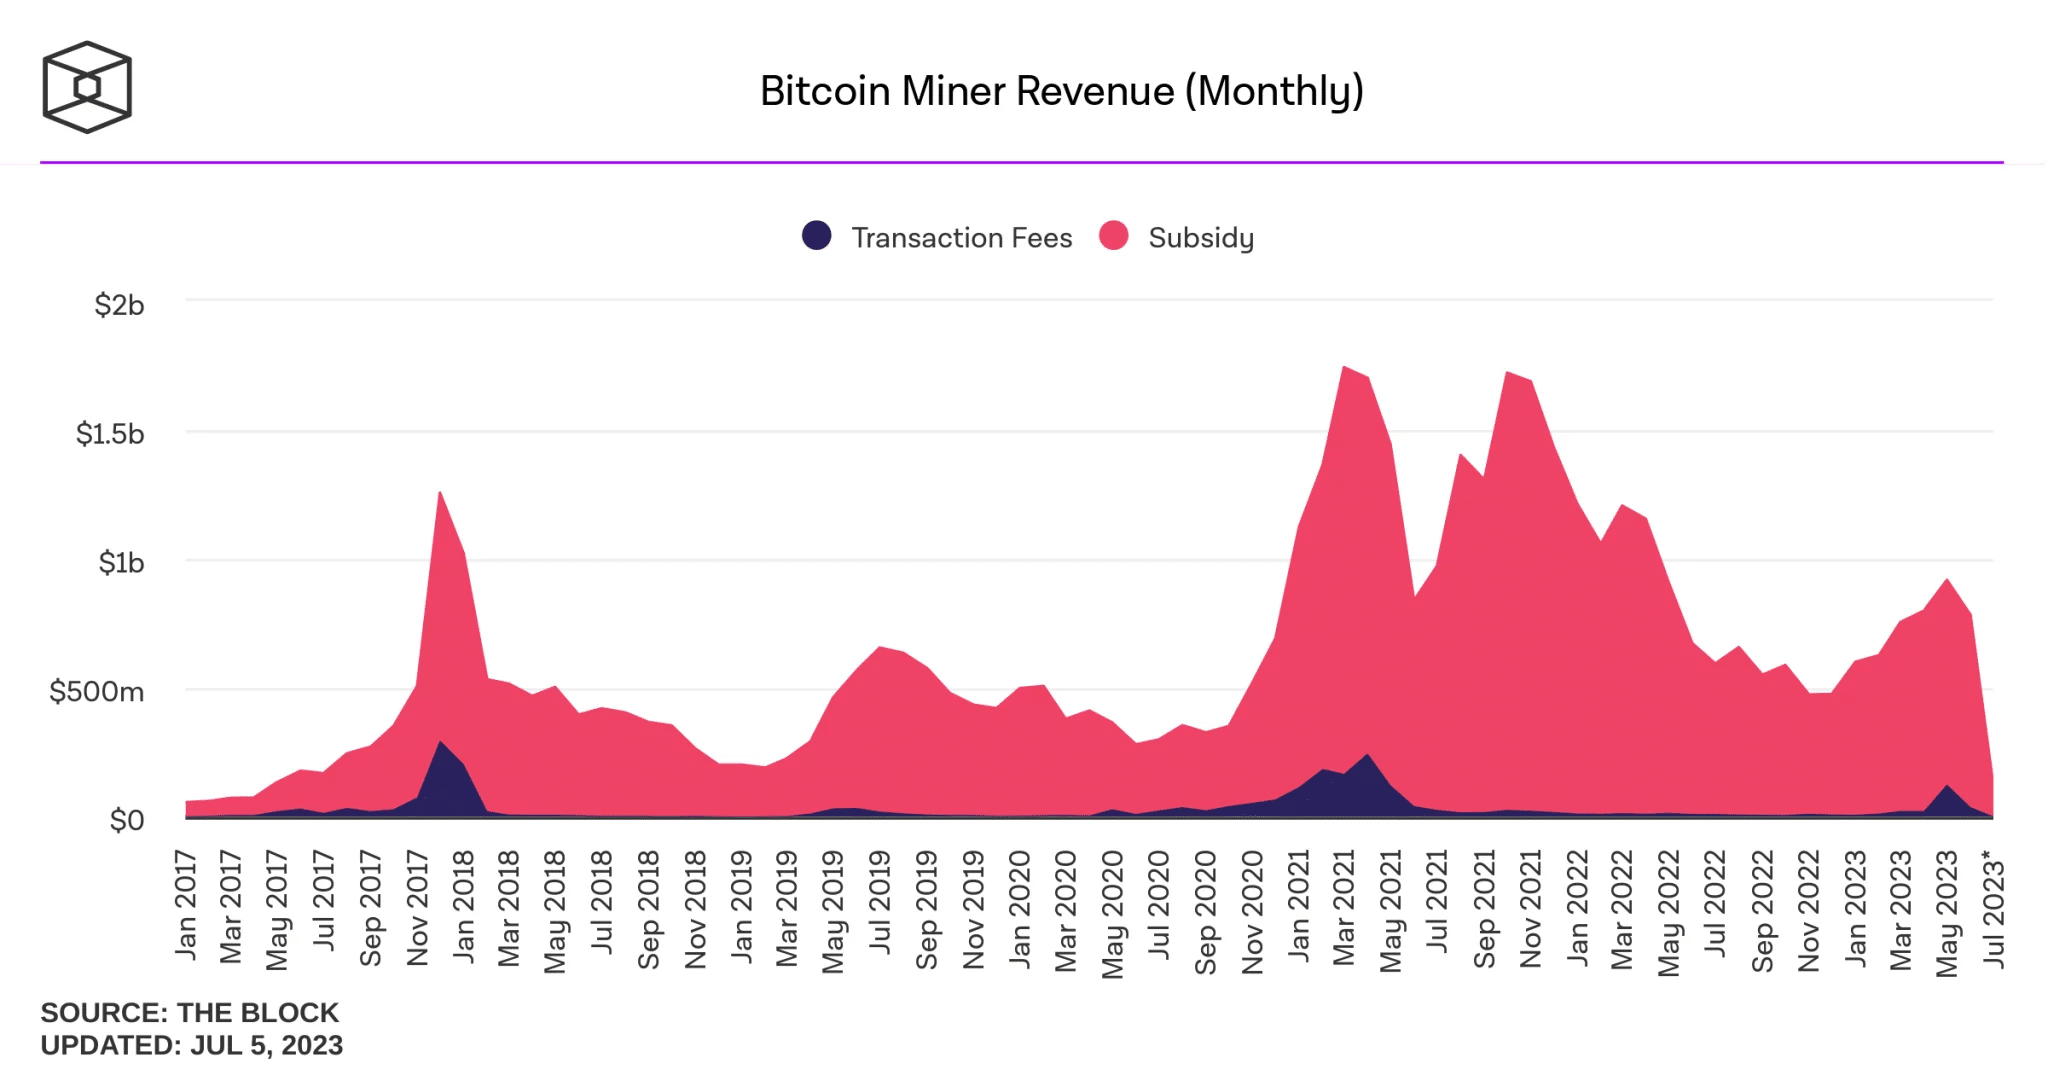 Evolution of Bitcoin miners' revenues since 2017